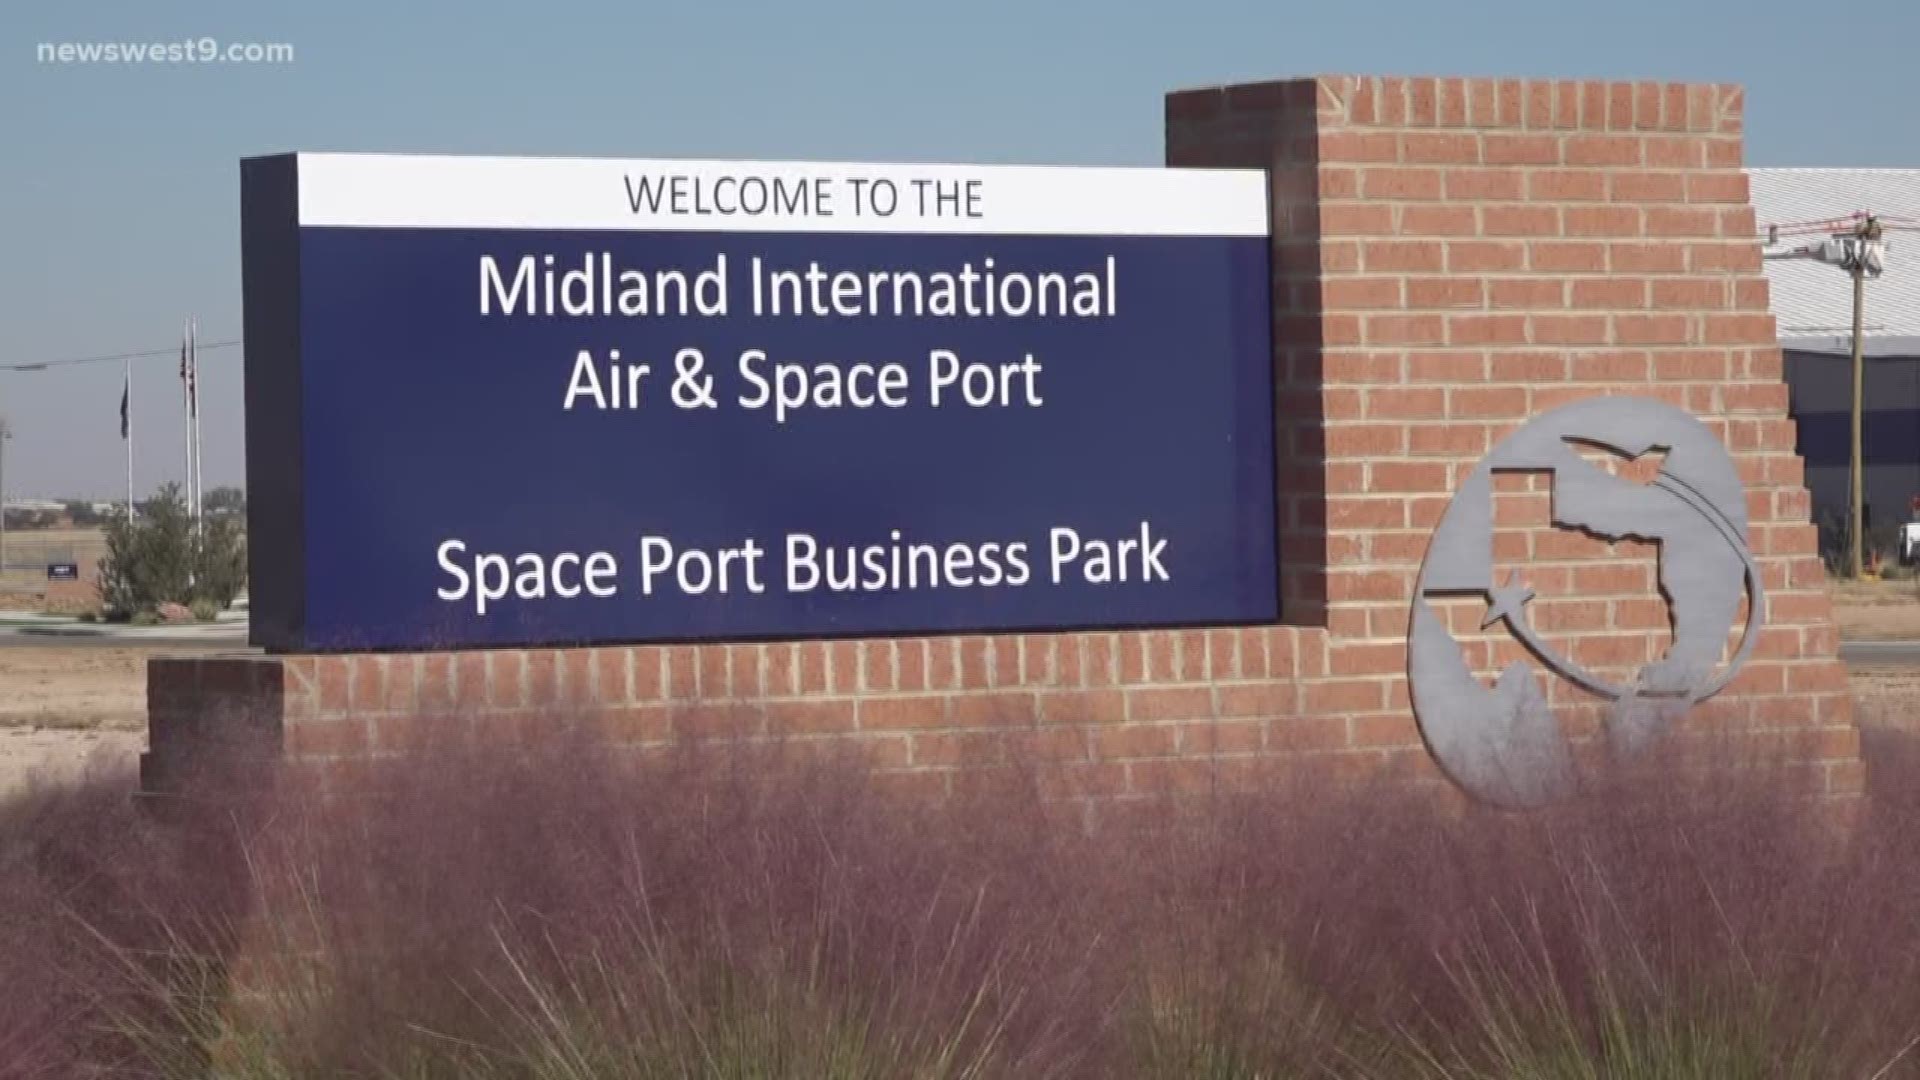 Investors estimate space could be a trillion-dollar industry. Where does Midland fit in that conversation?